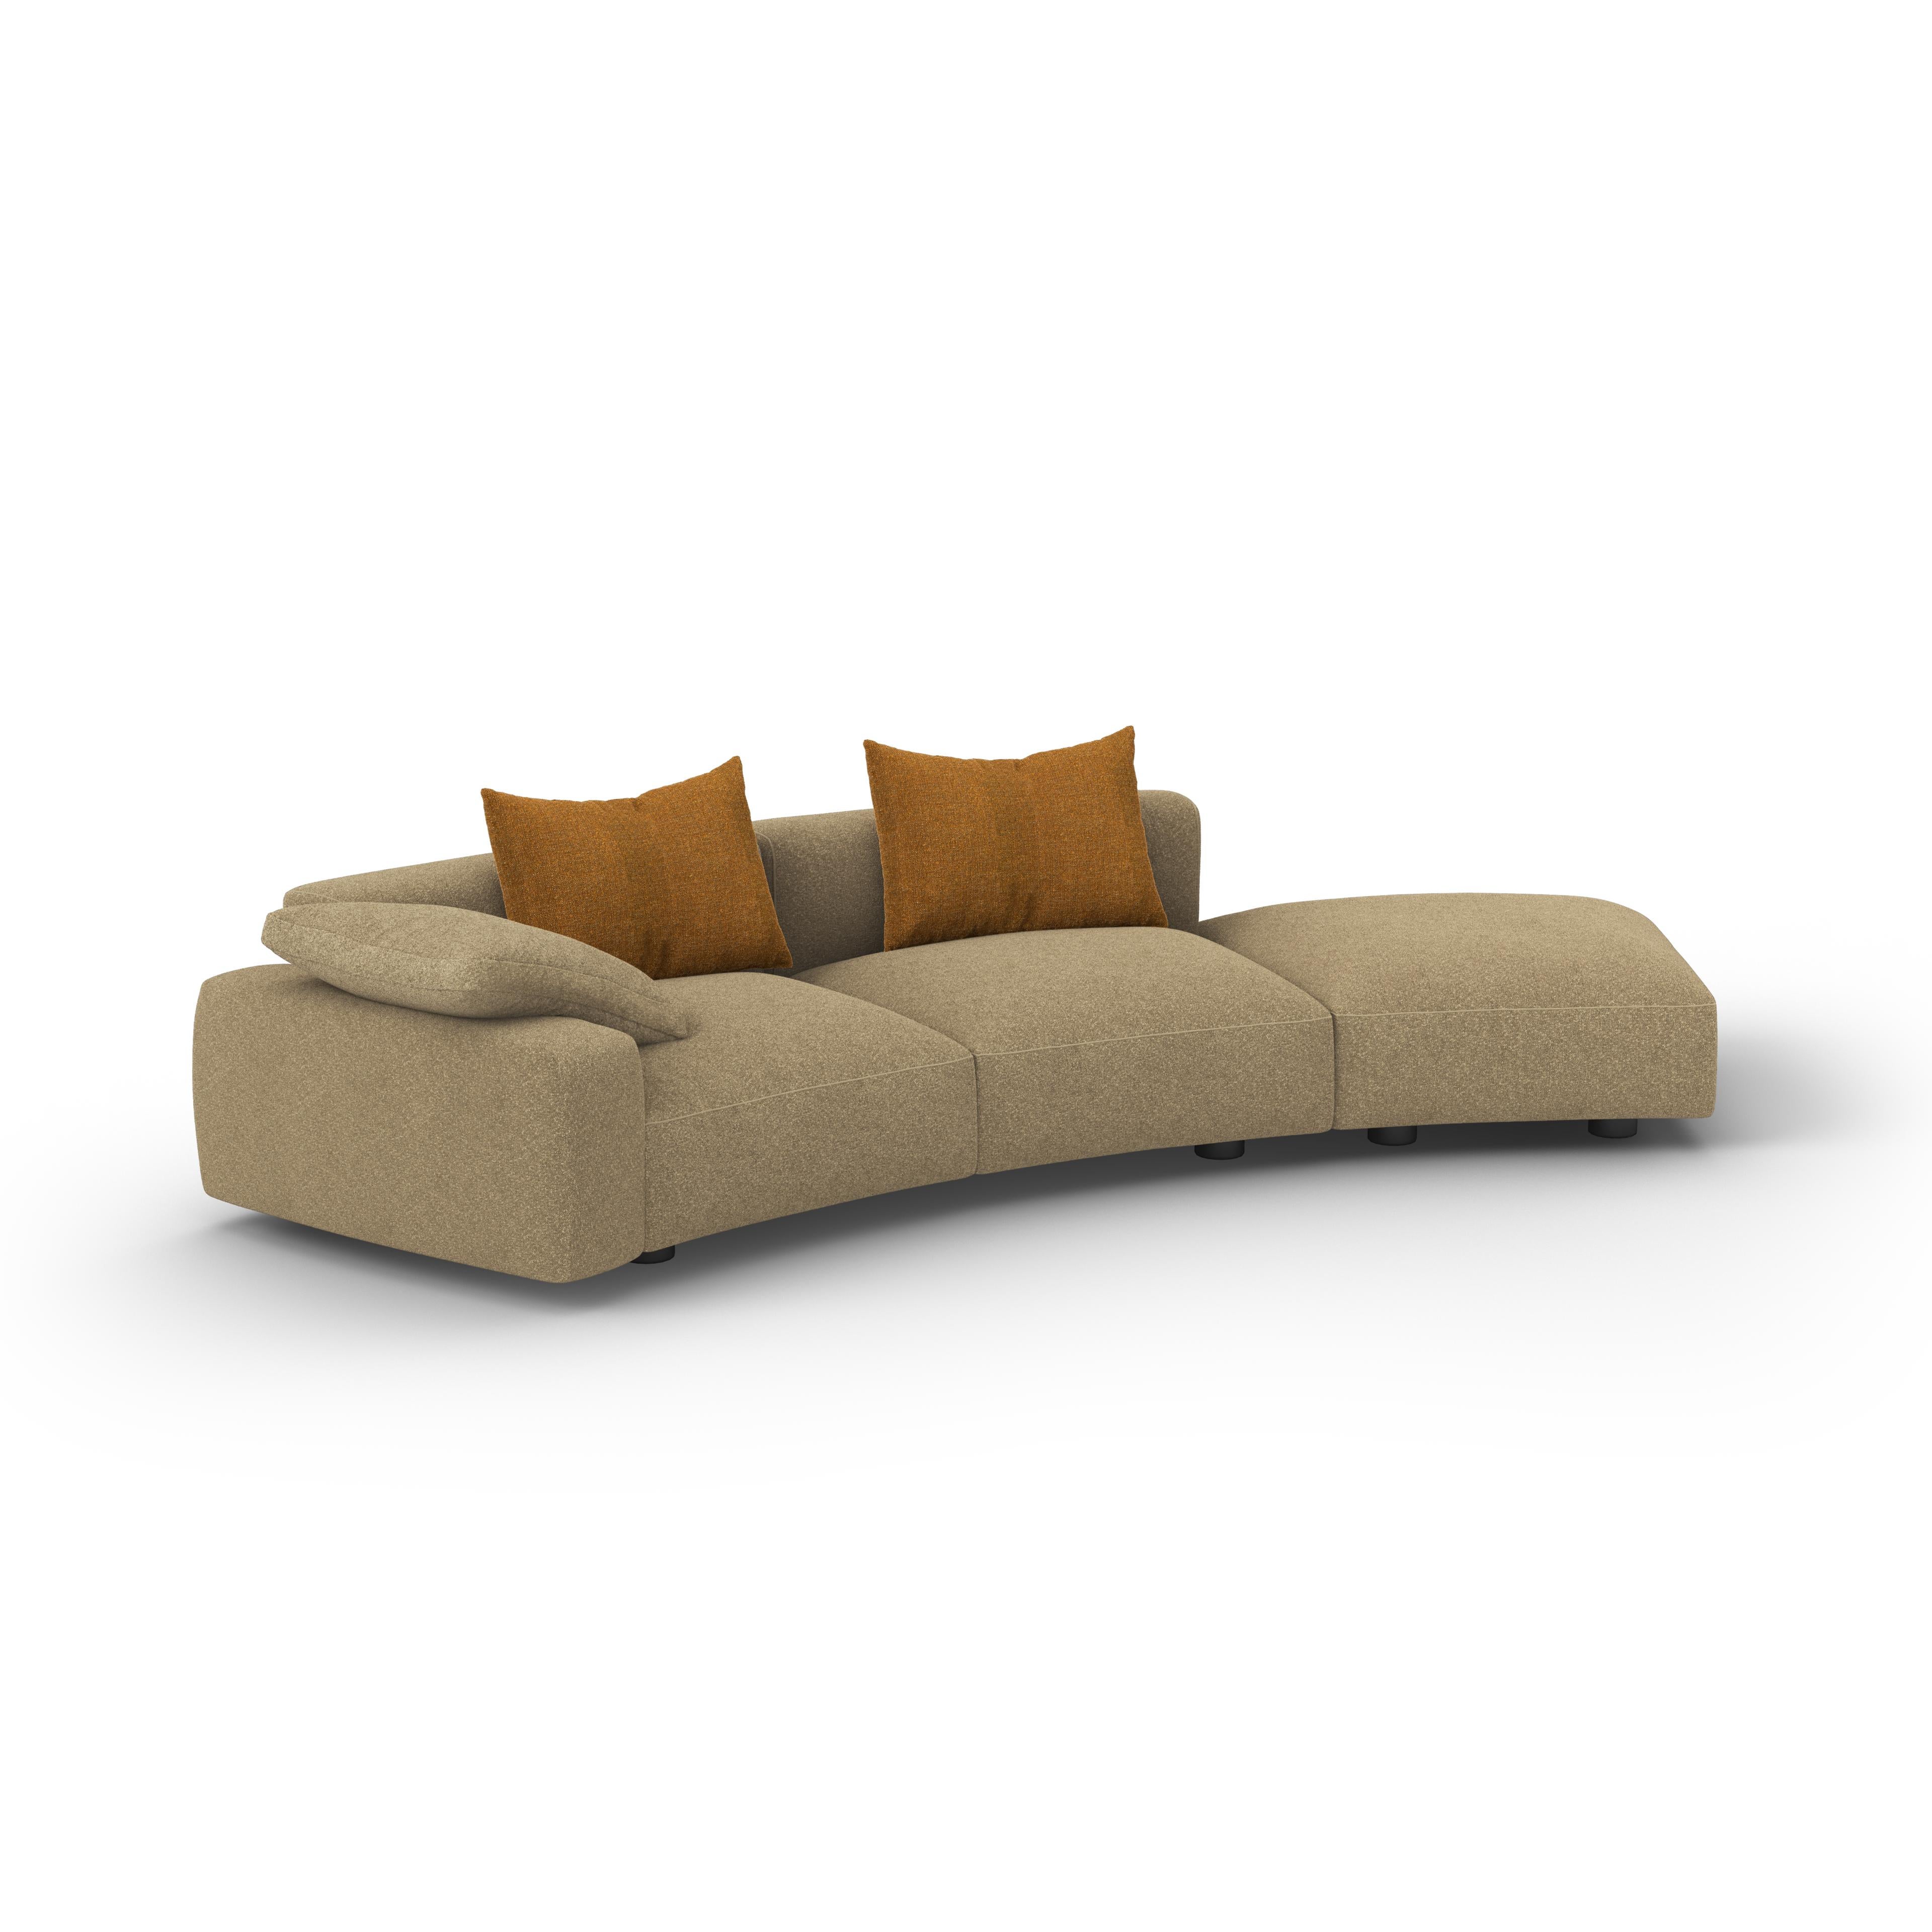 The Pascal Modular allows for unlimited configurations in curved and straight options. Each piece is wrapped in down and feather to maximize comfort lounging. Includes arm pillows and one pillow per seat back. 

As shown: Arm right chair with